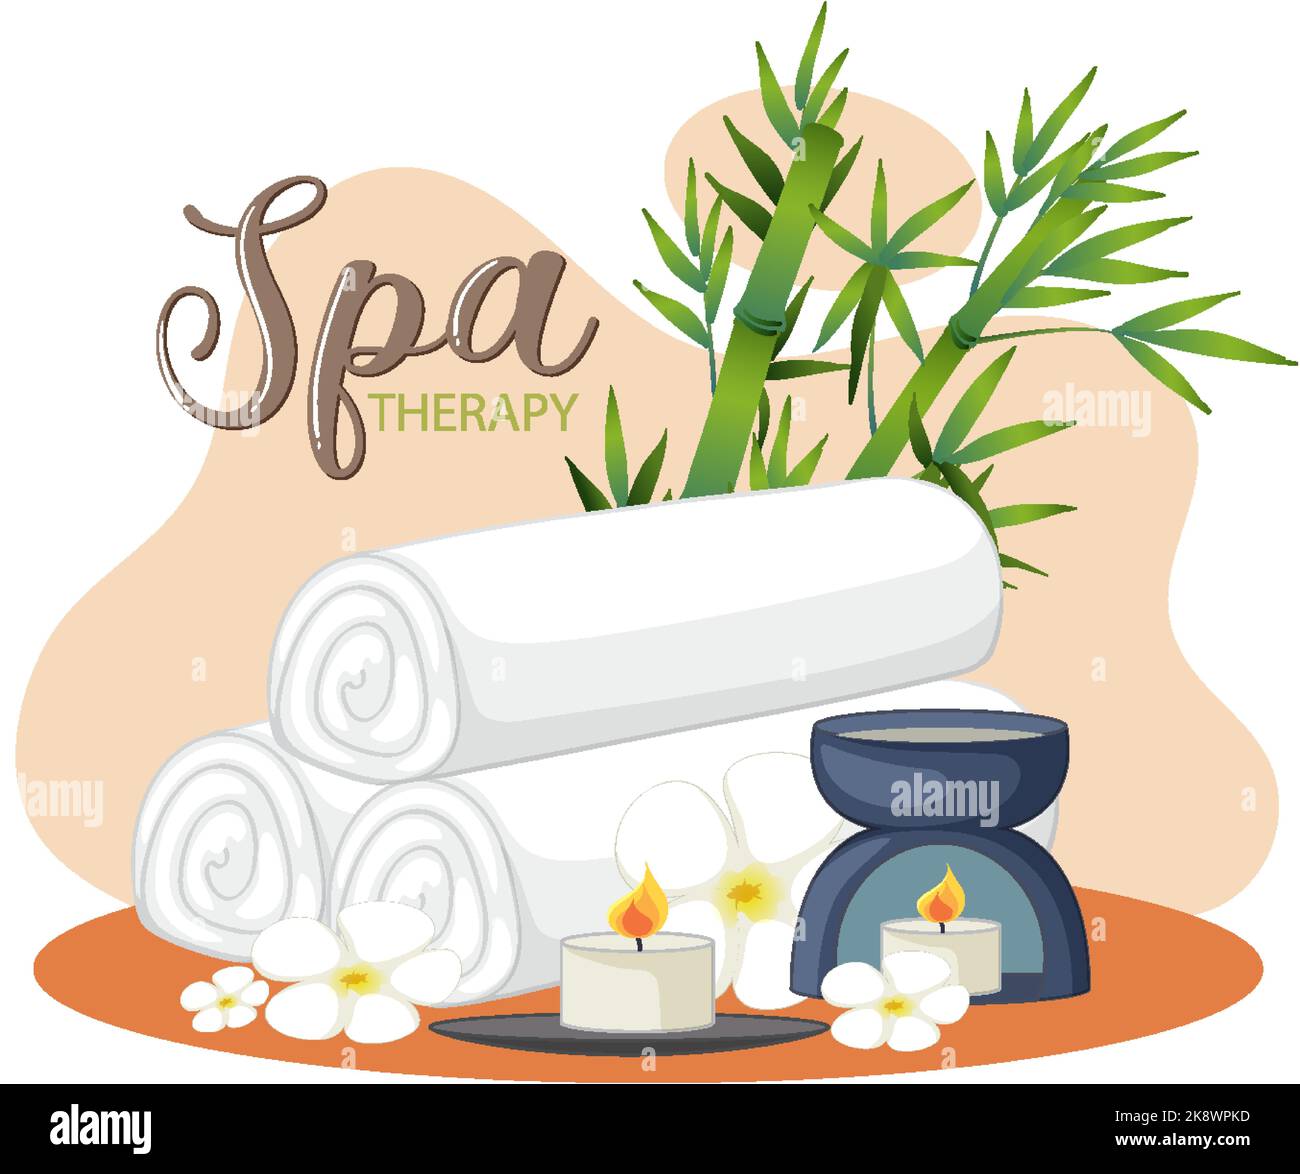 Spa text with spa aroma objects illustration Stock Vector